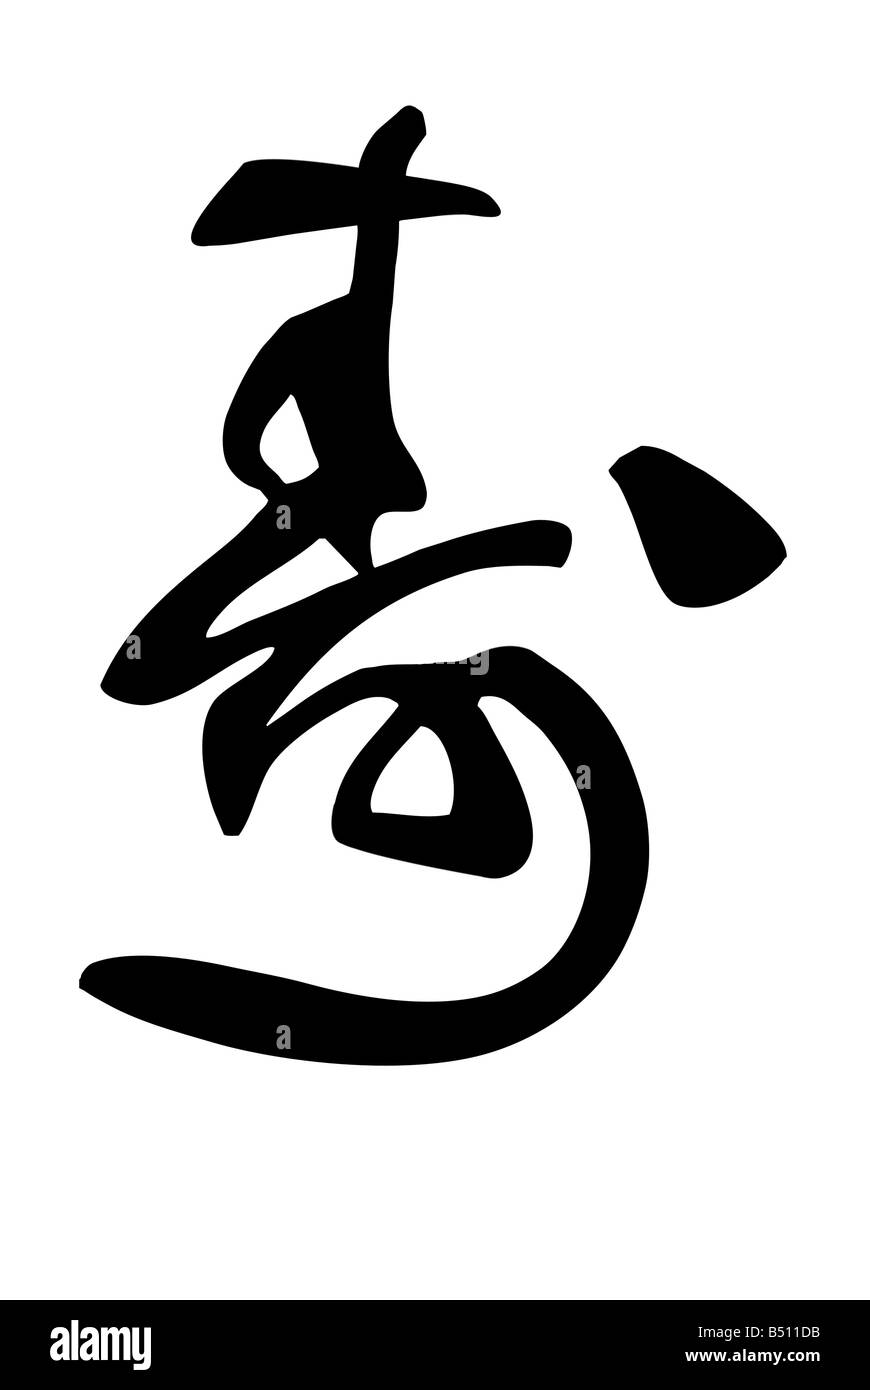 Chinese calligraphy for life-span Stock Photo